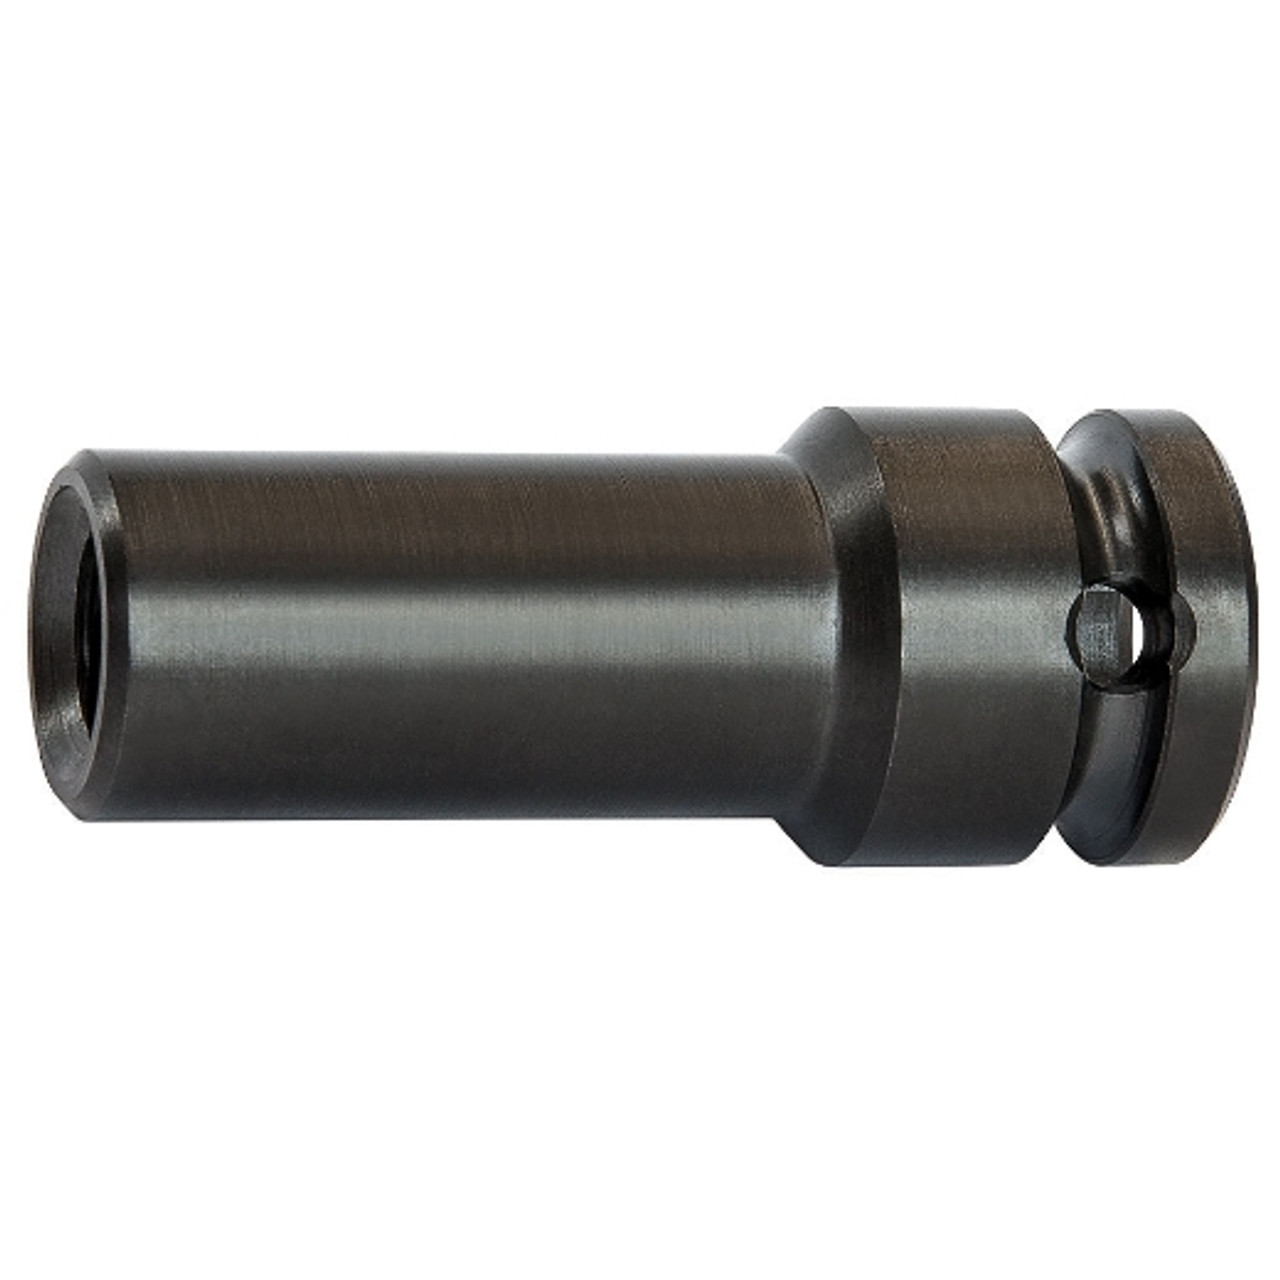 HECO Drive Bits | WB-T Drive Bits in 16mm Diameter for Insertion Only